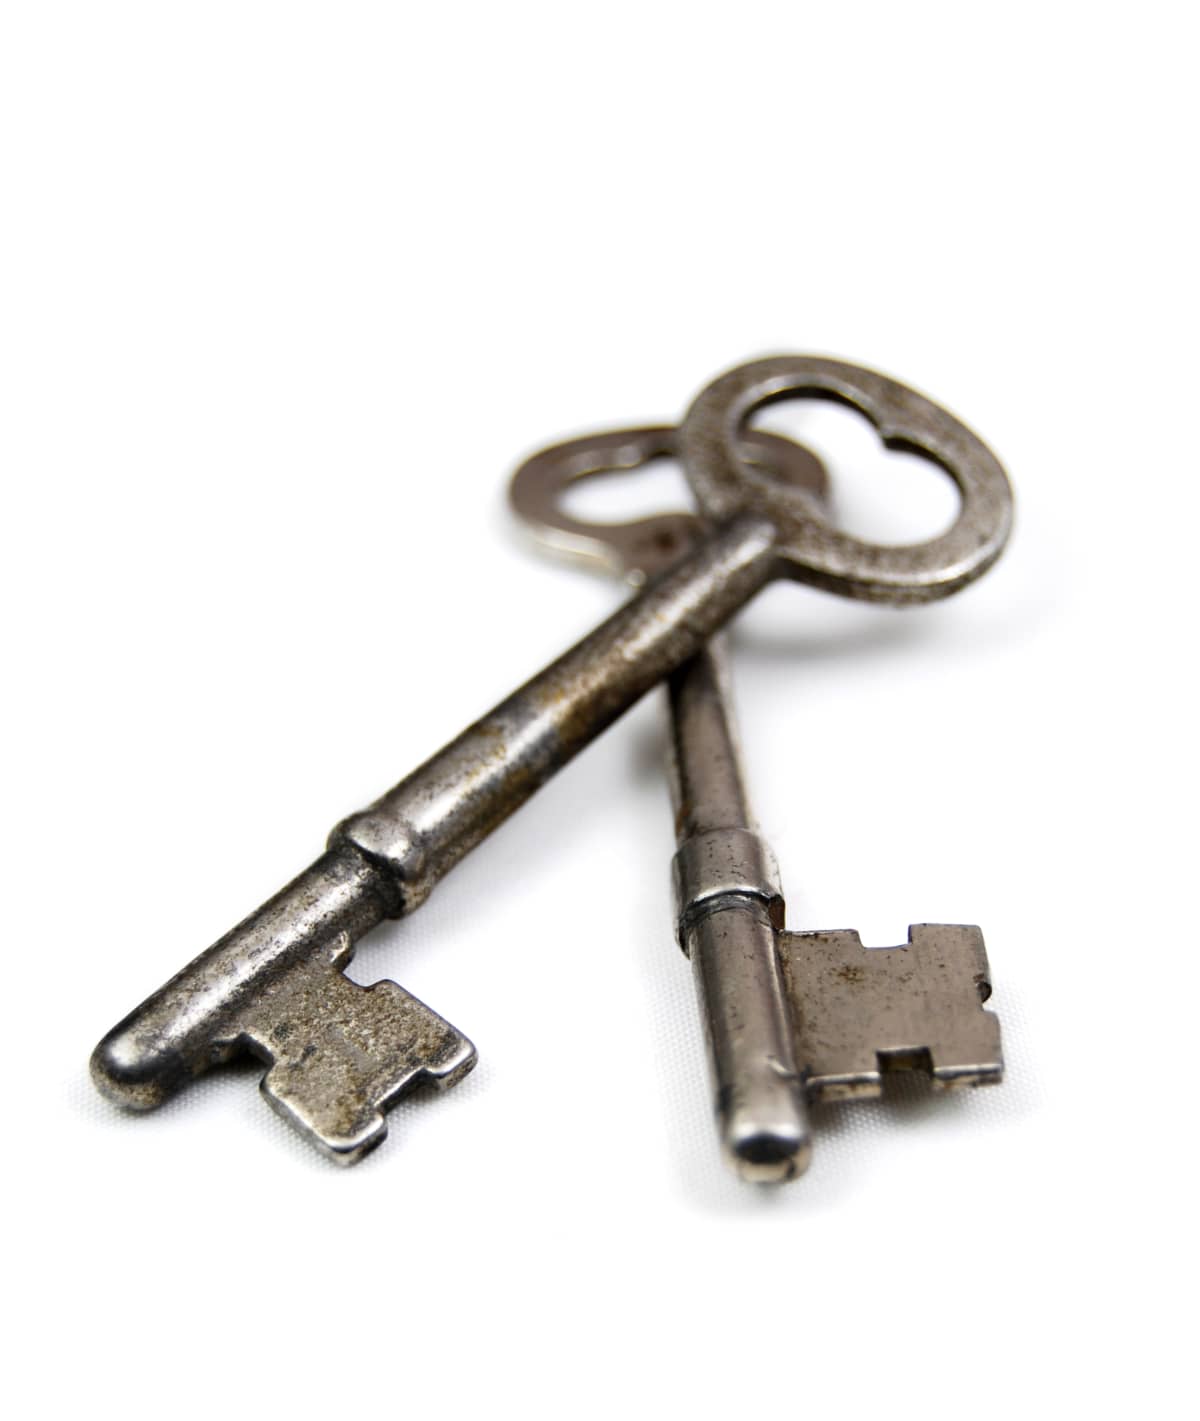 Two old fashioned skeleton keys on a white background. Unlock new doors.